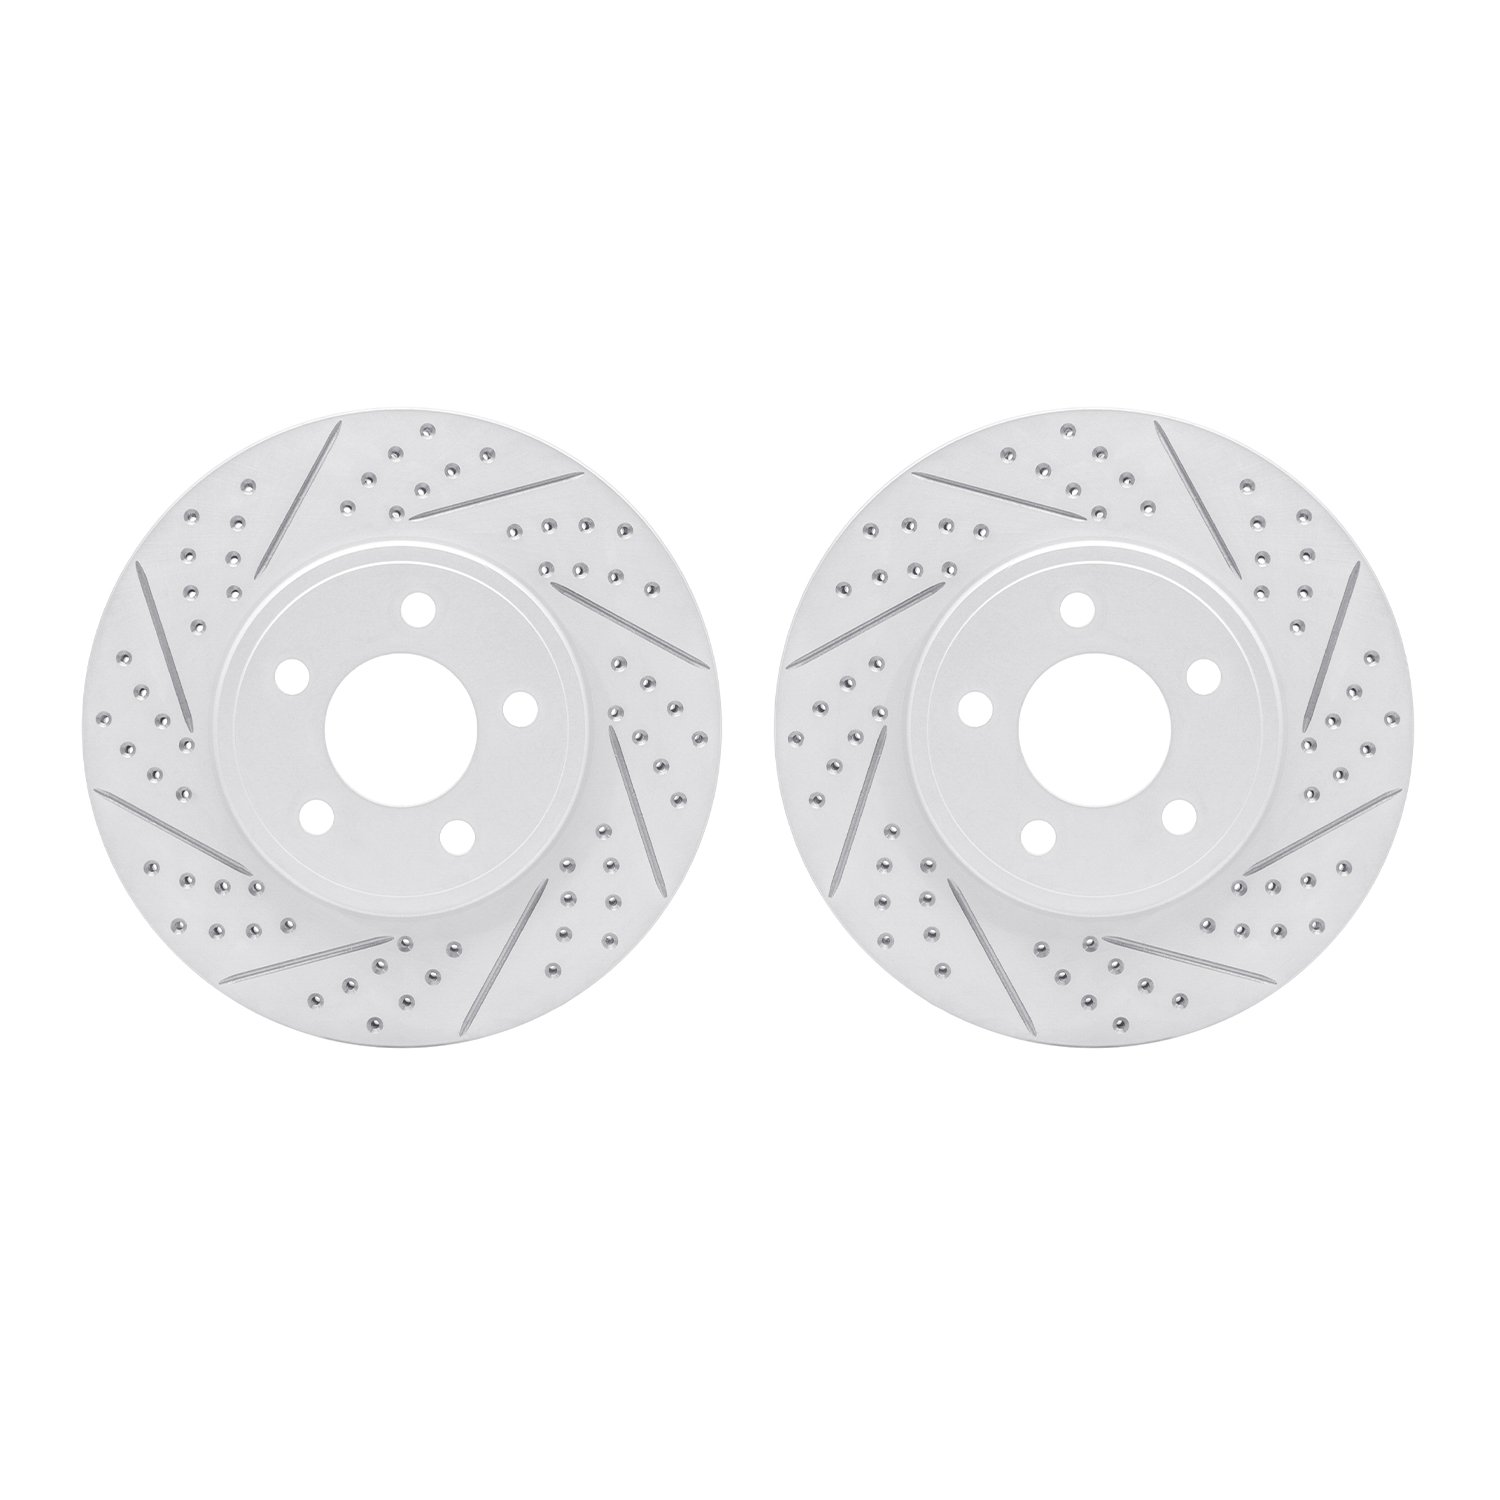 2002-56002 Geoperformance Drilled/Slotted Brake Rotors, 2003-2011 Ford/Lincoln/Mercury/Mazda, Position: Front